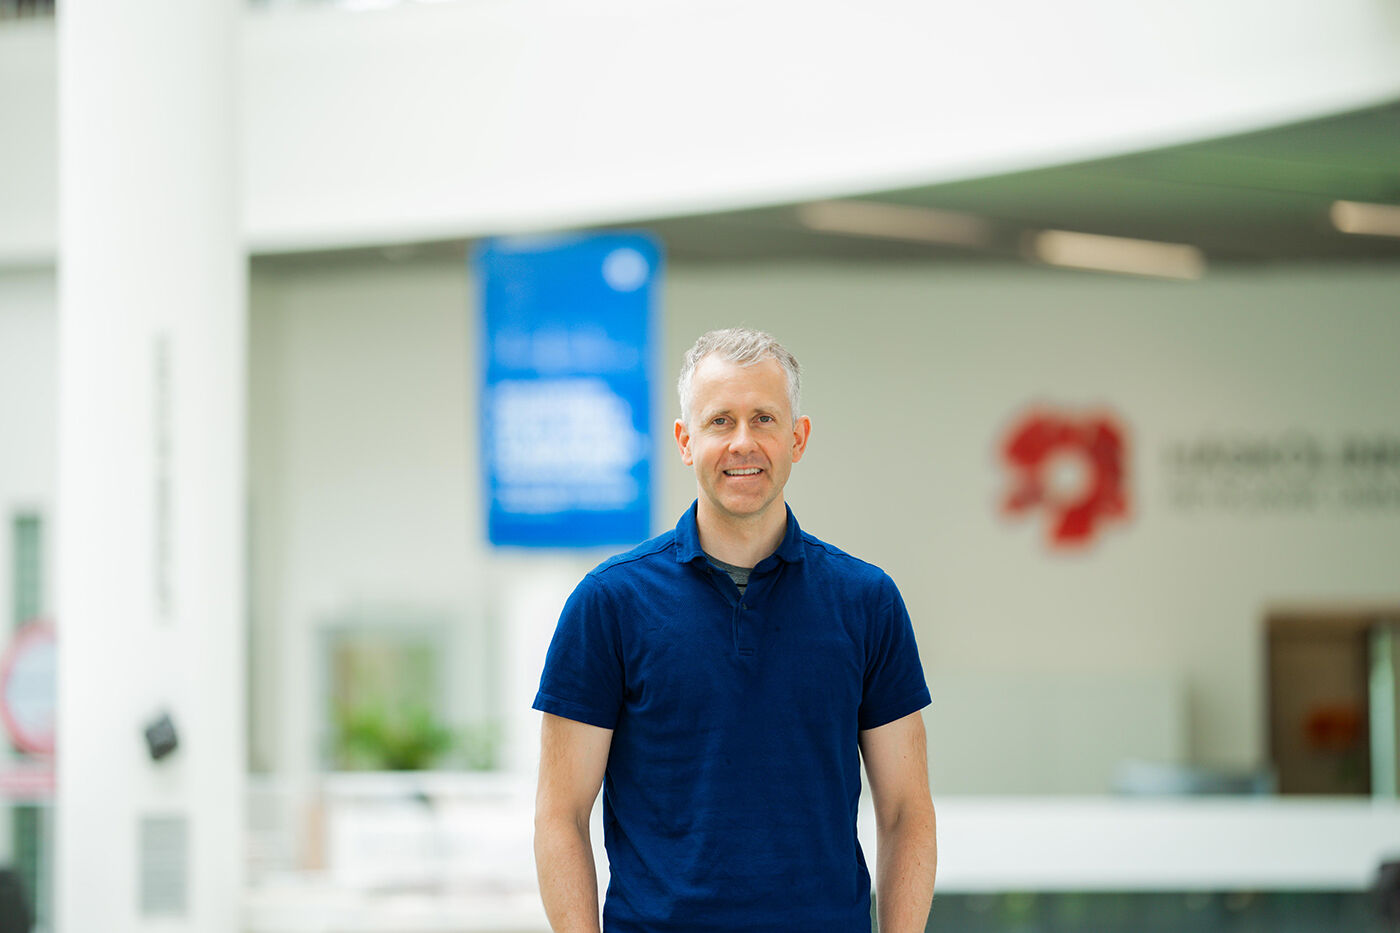 Dr Ármann Gylfason is the newly appointed Dean of the Department of Engineering at Reykjavík University